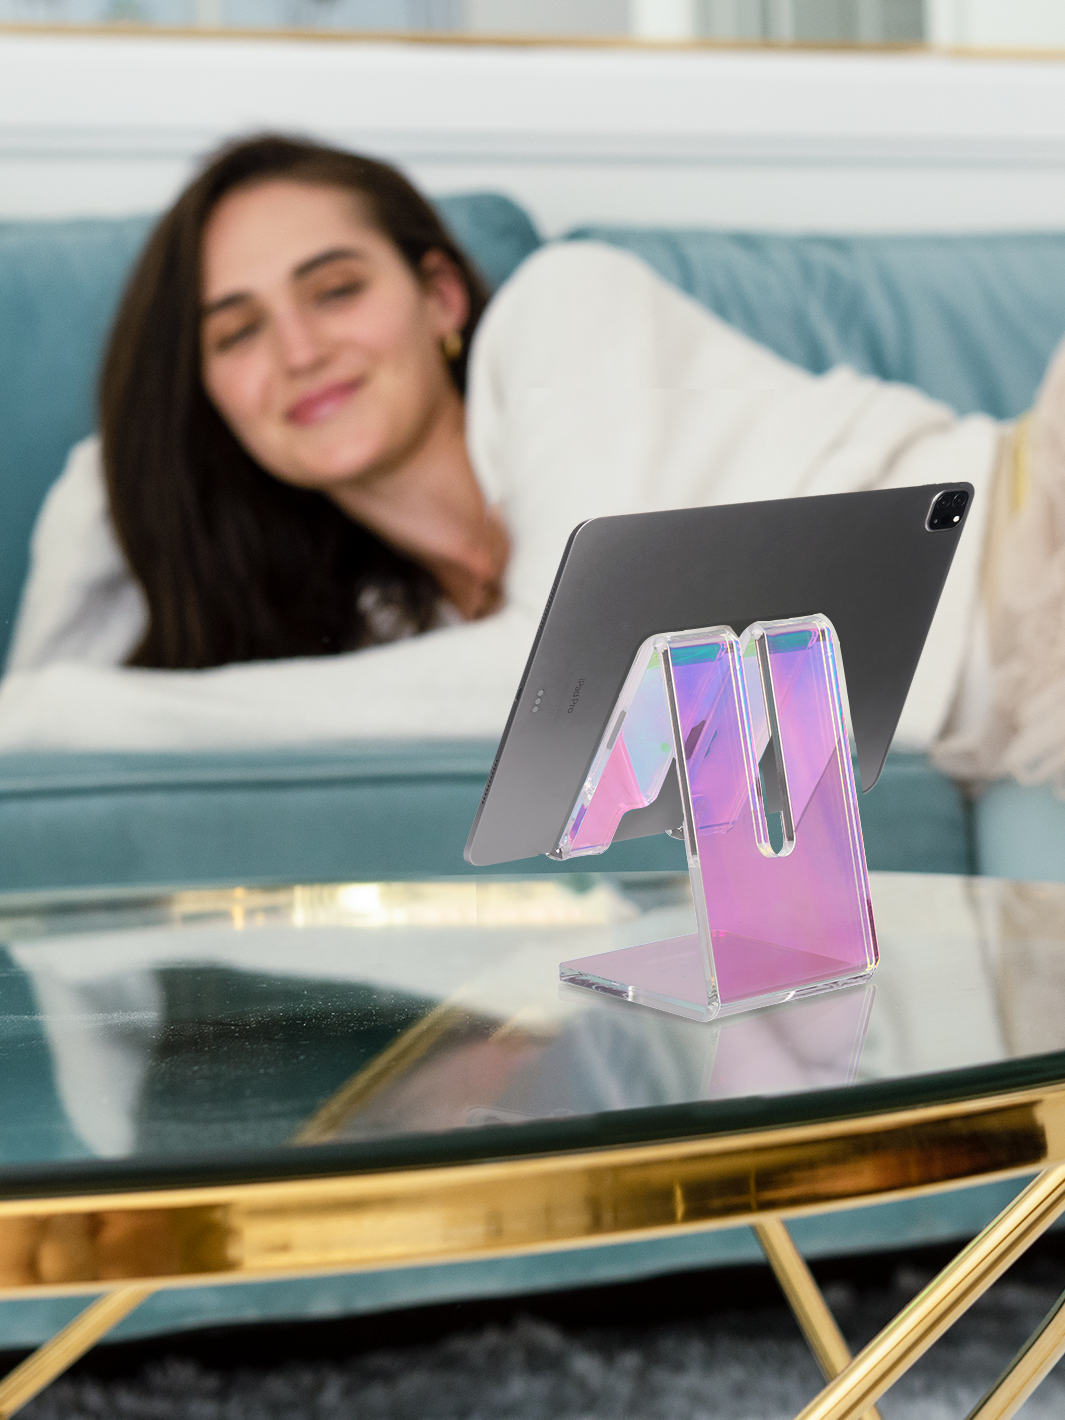 Holographic Phone & Tablet Stand